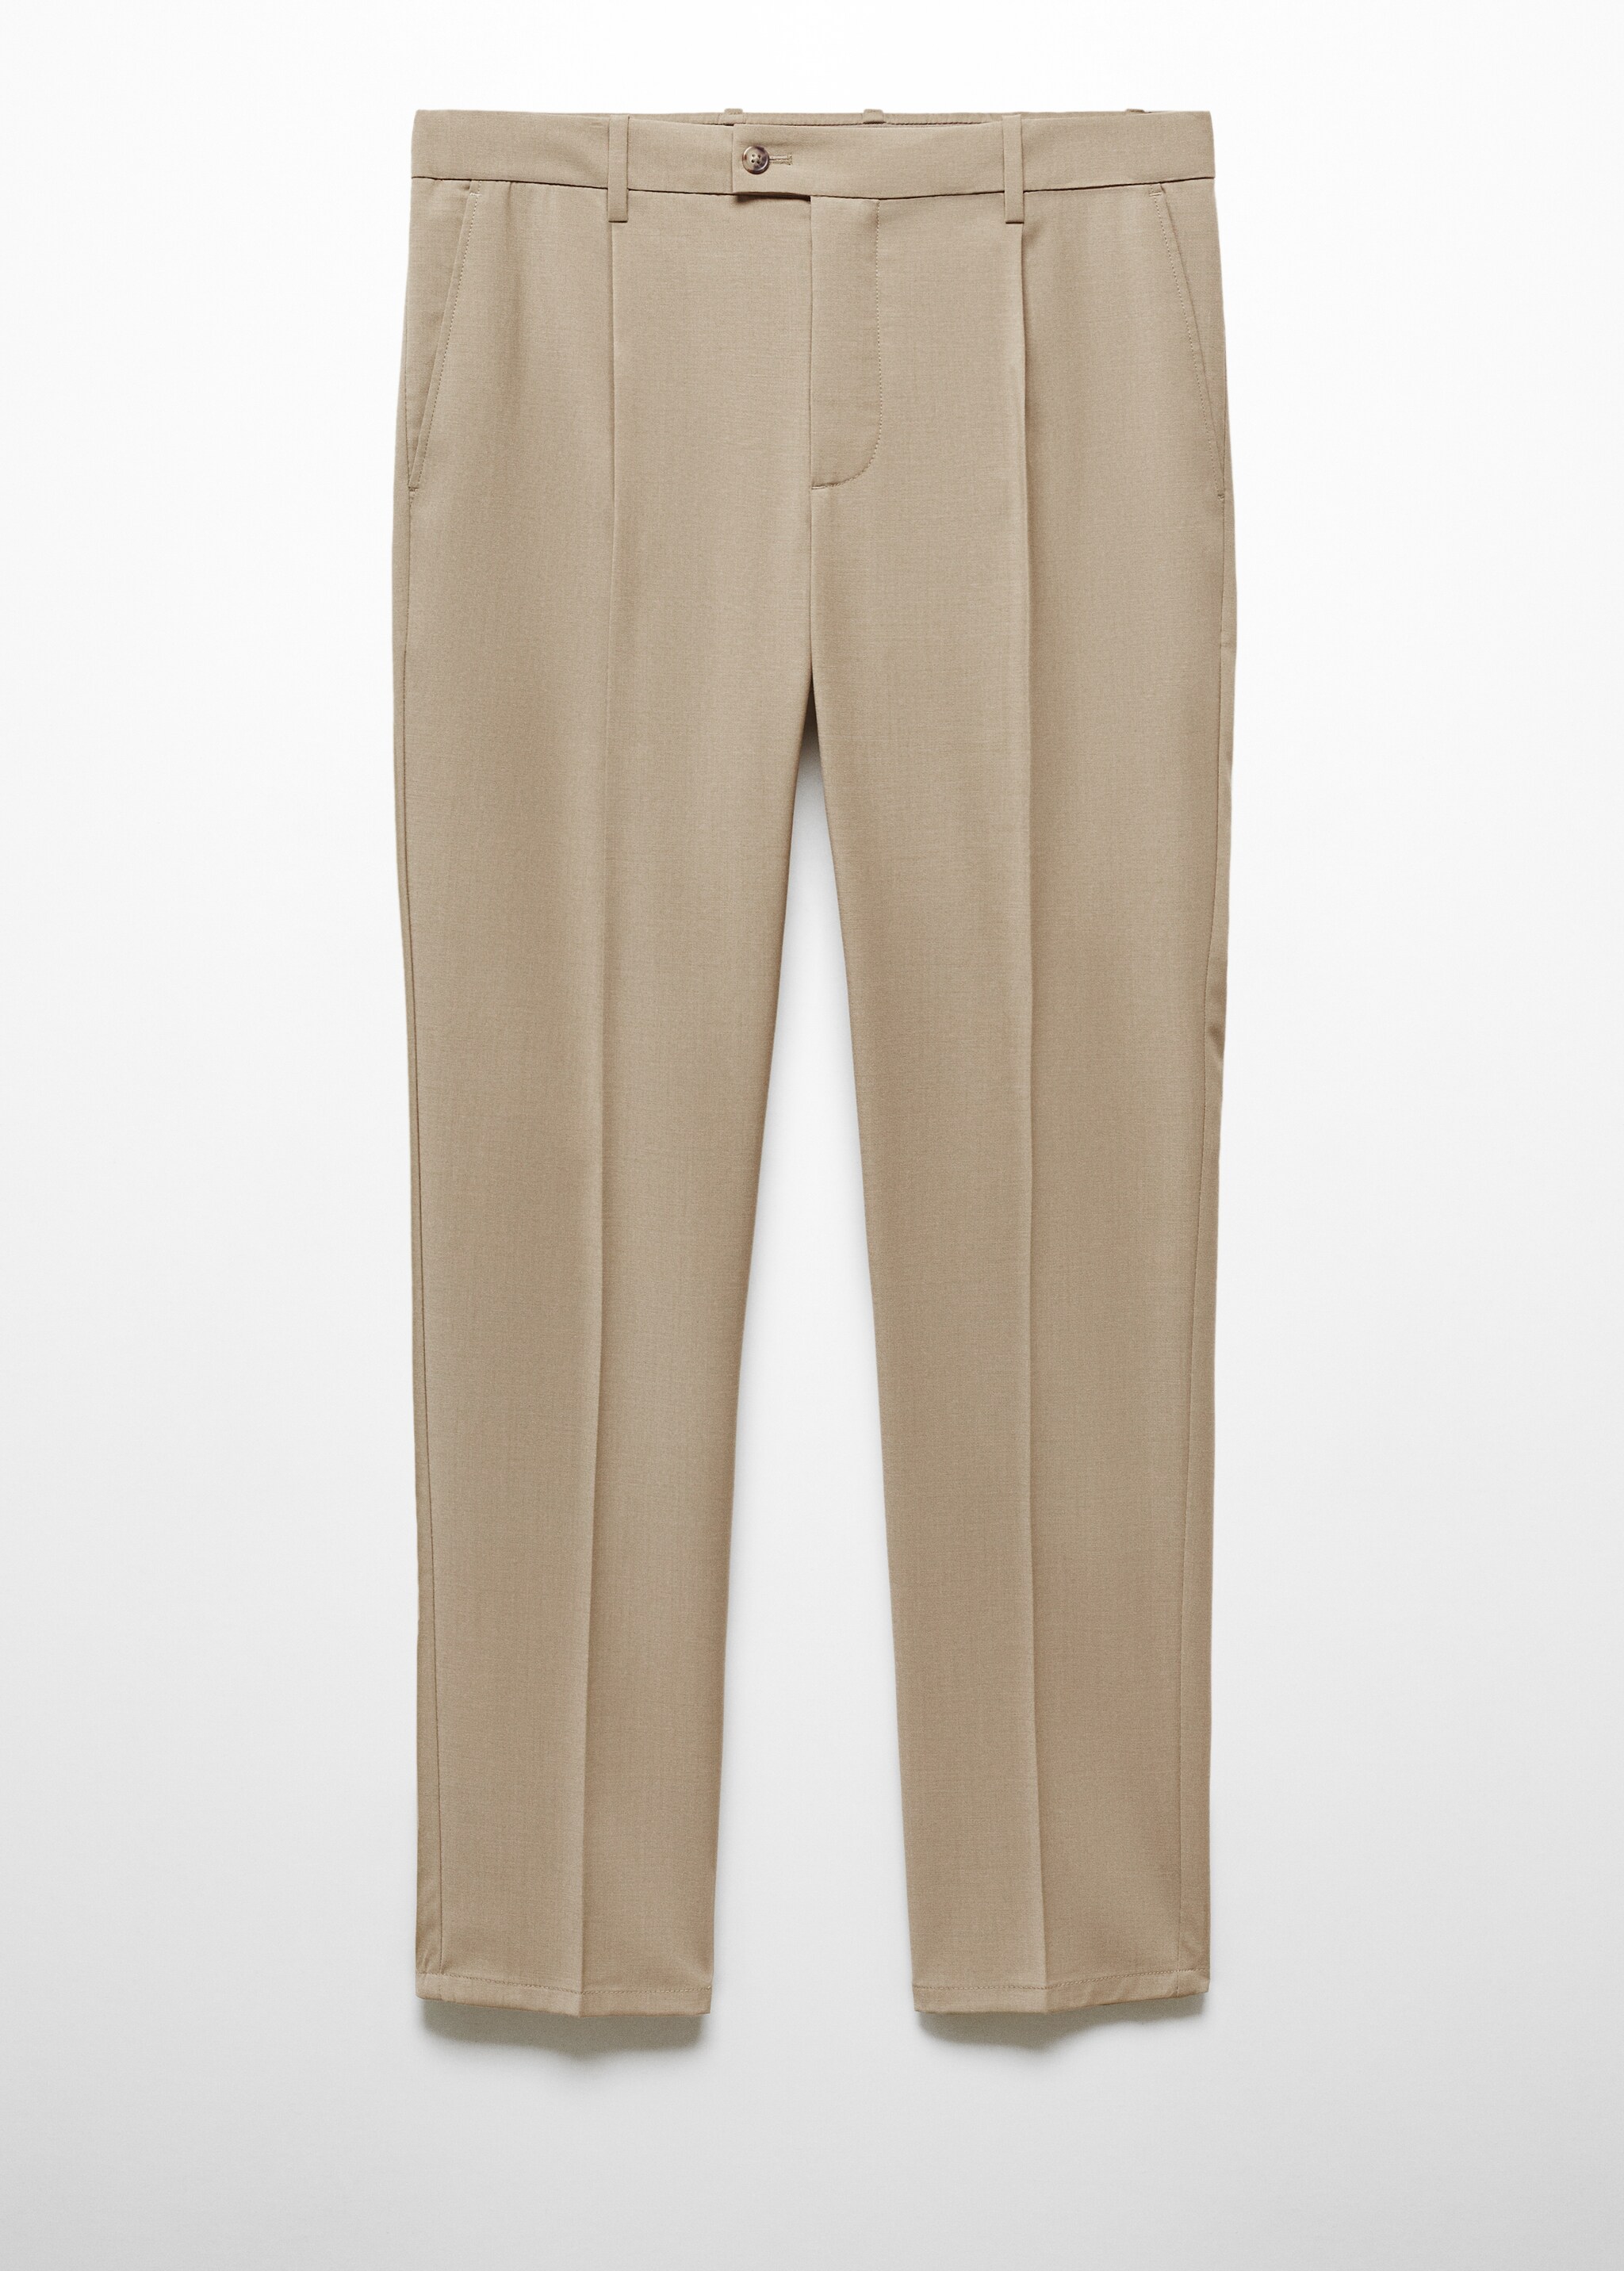 Pleat detail wool pants - Article without model